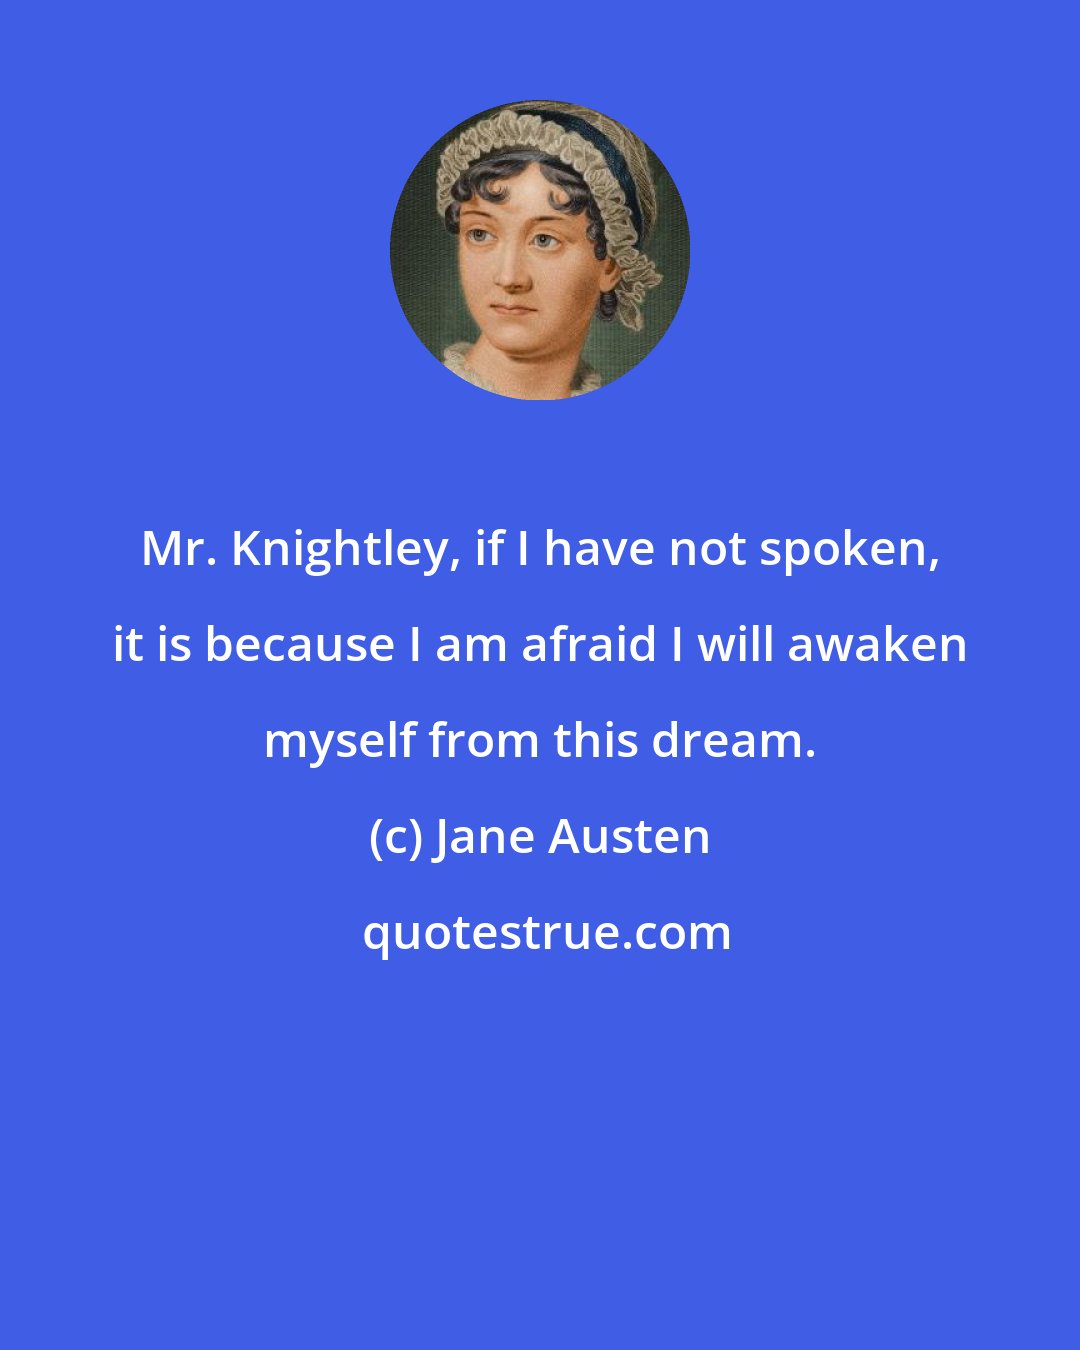 Jane Austen: Mr. Knightley, if I have not spoken, it is because I am afraid I will awaken myself from this dream.